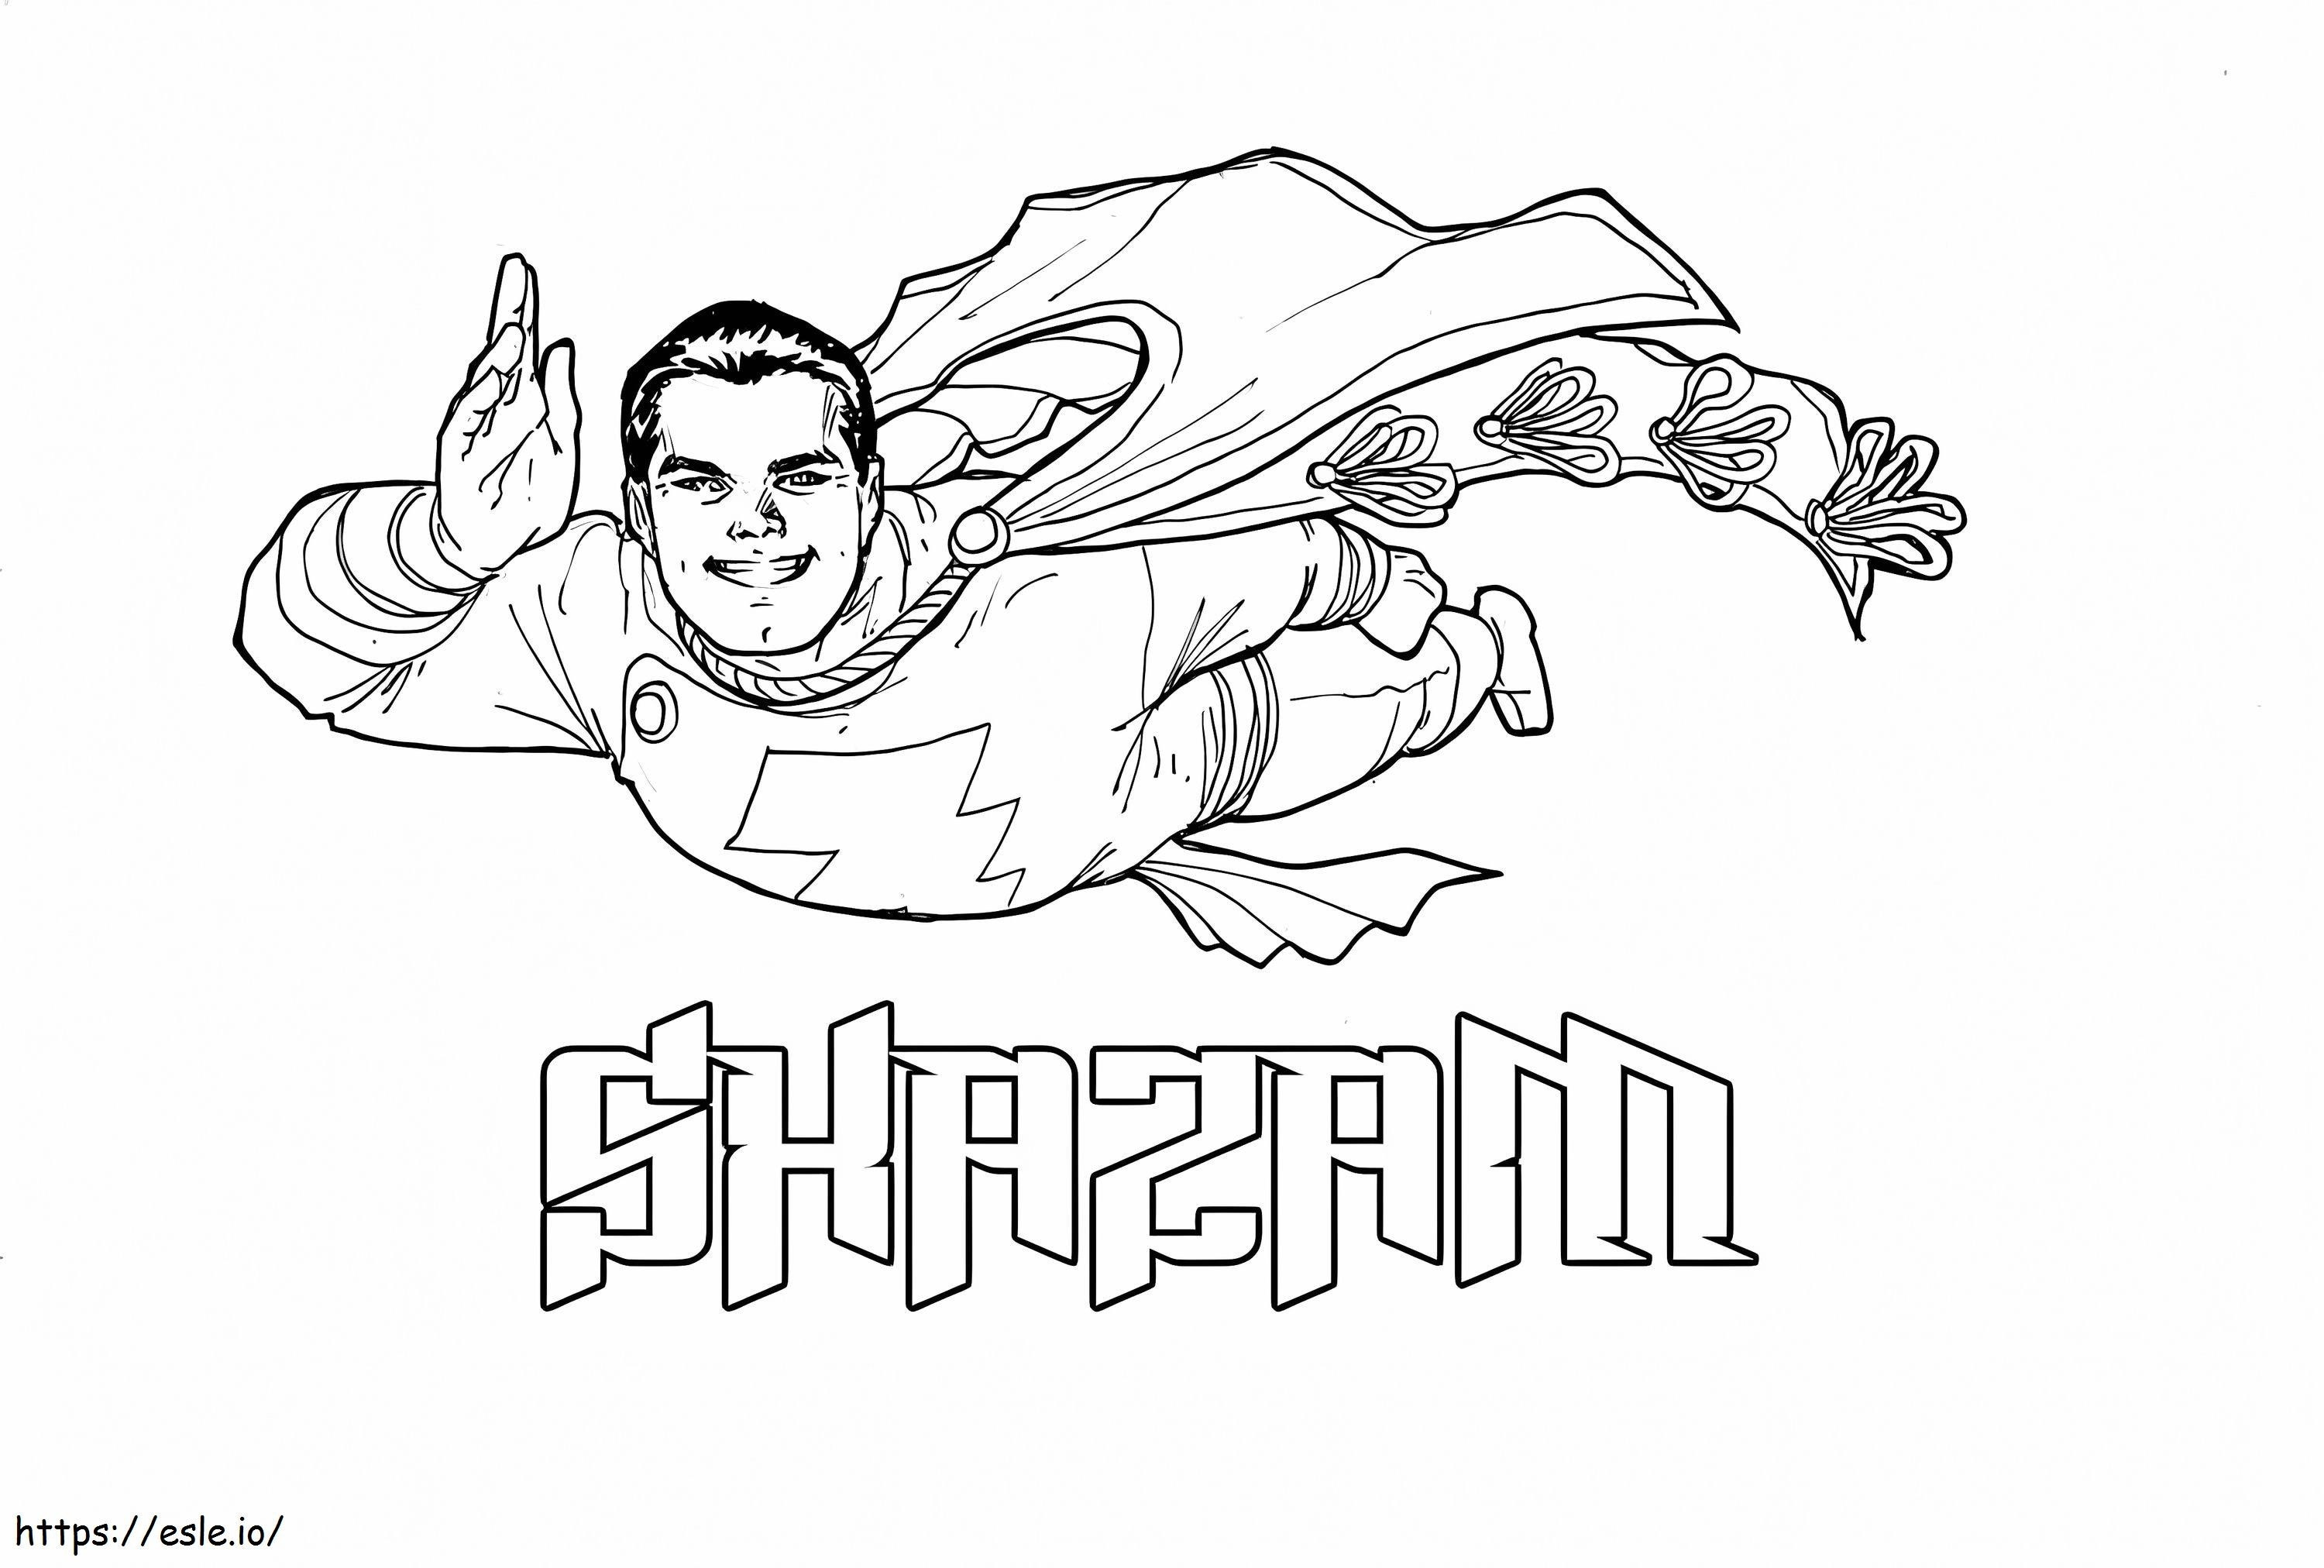 Shazam Is Smiling coloring page